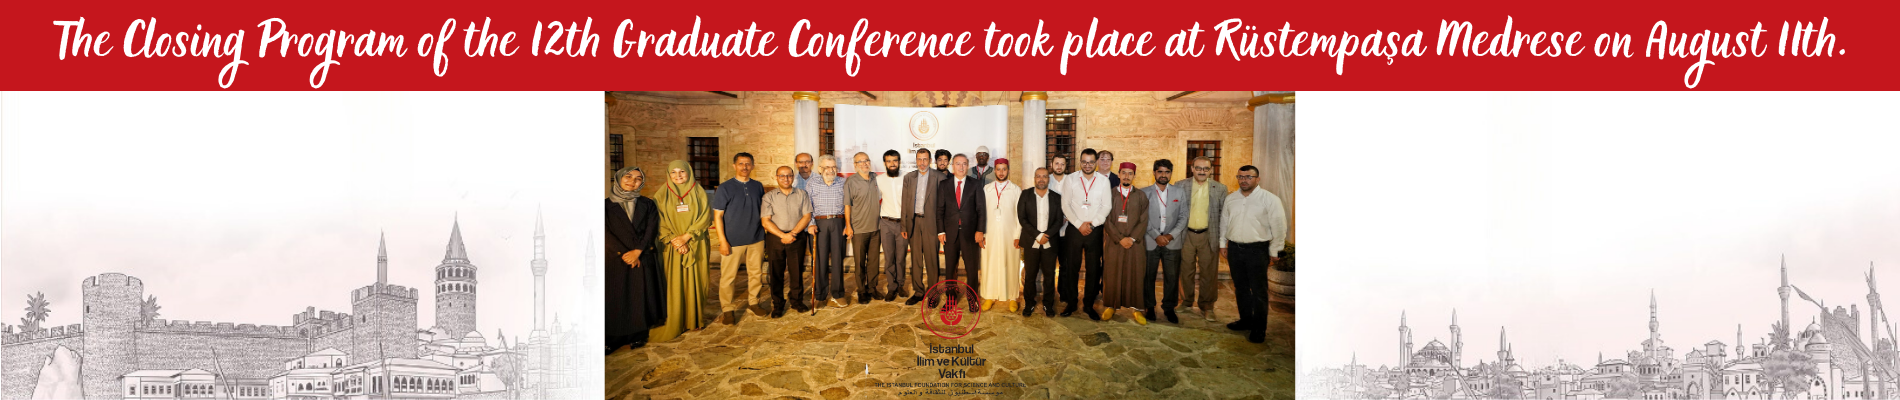 The Closing Program of the 12th Graduate Conference took place at Rüstempaşa Medrese on August 11th.